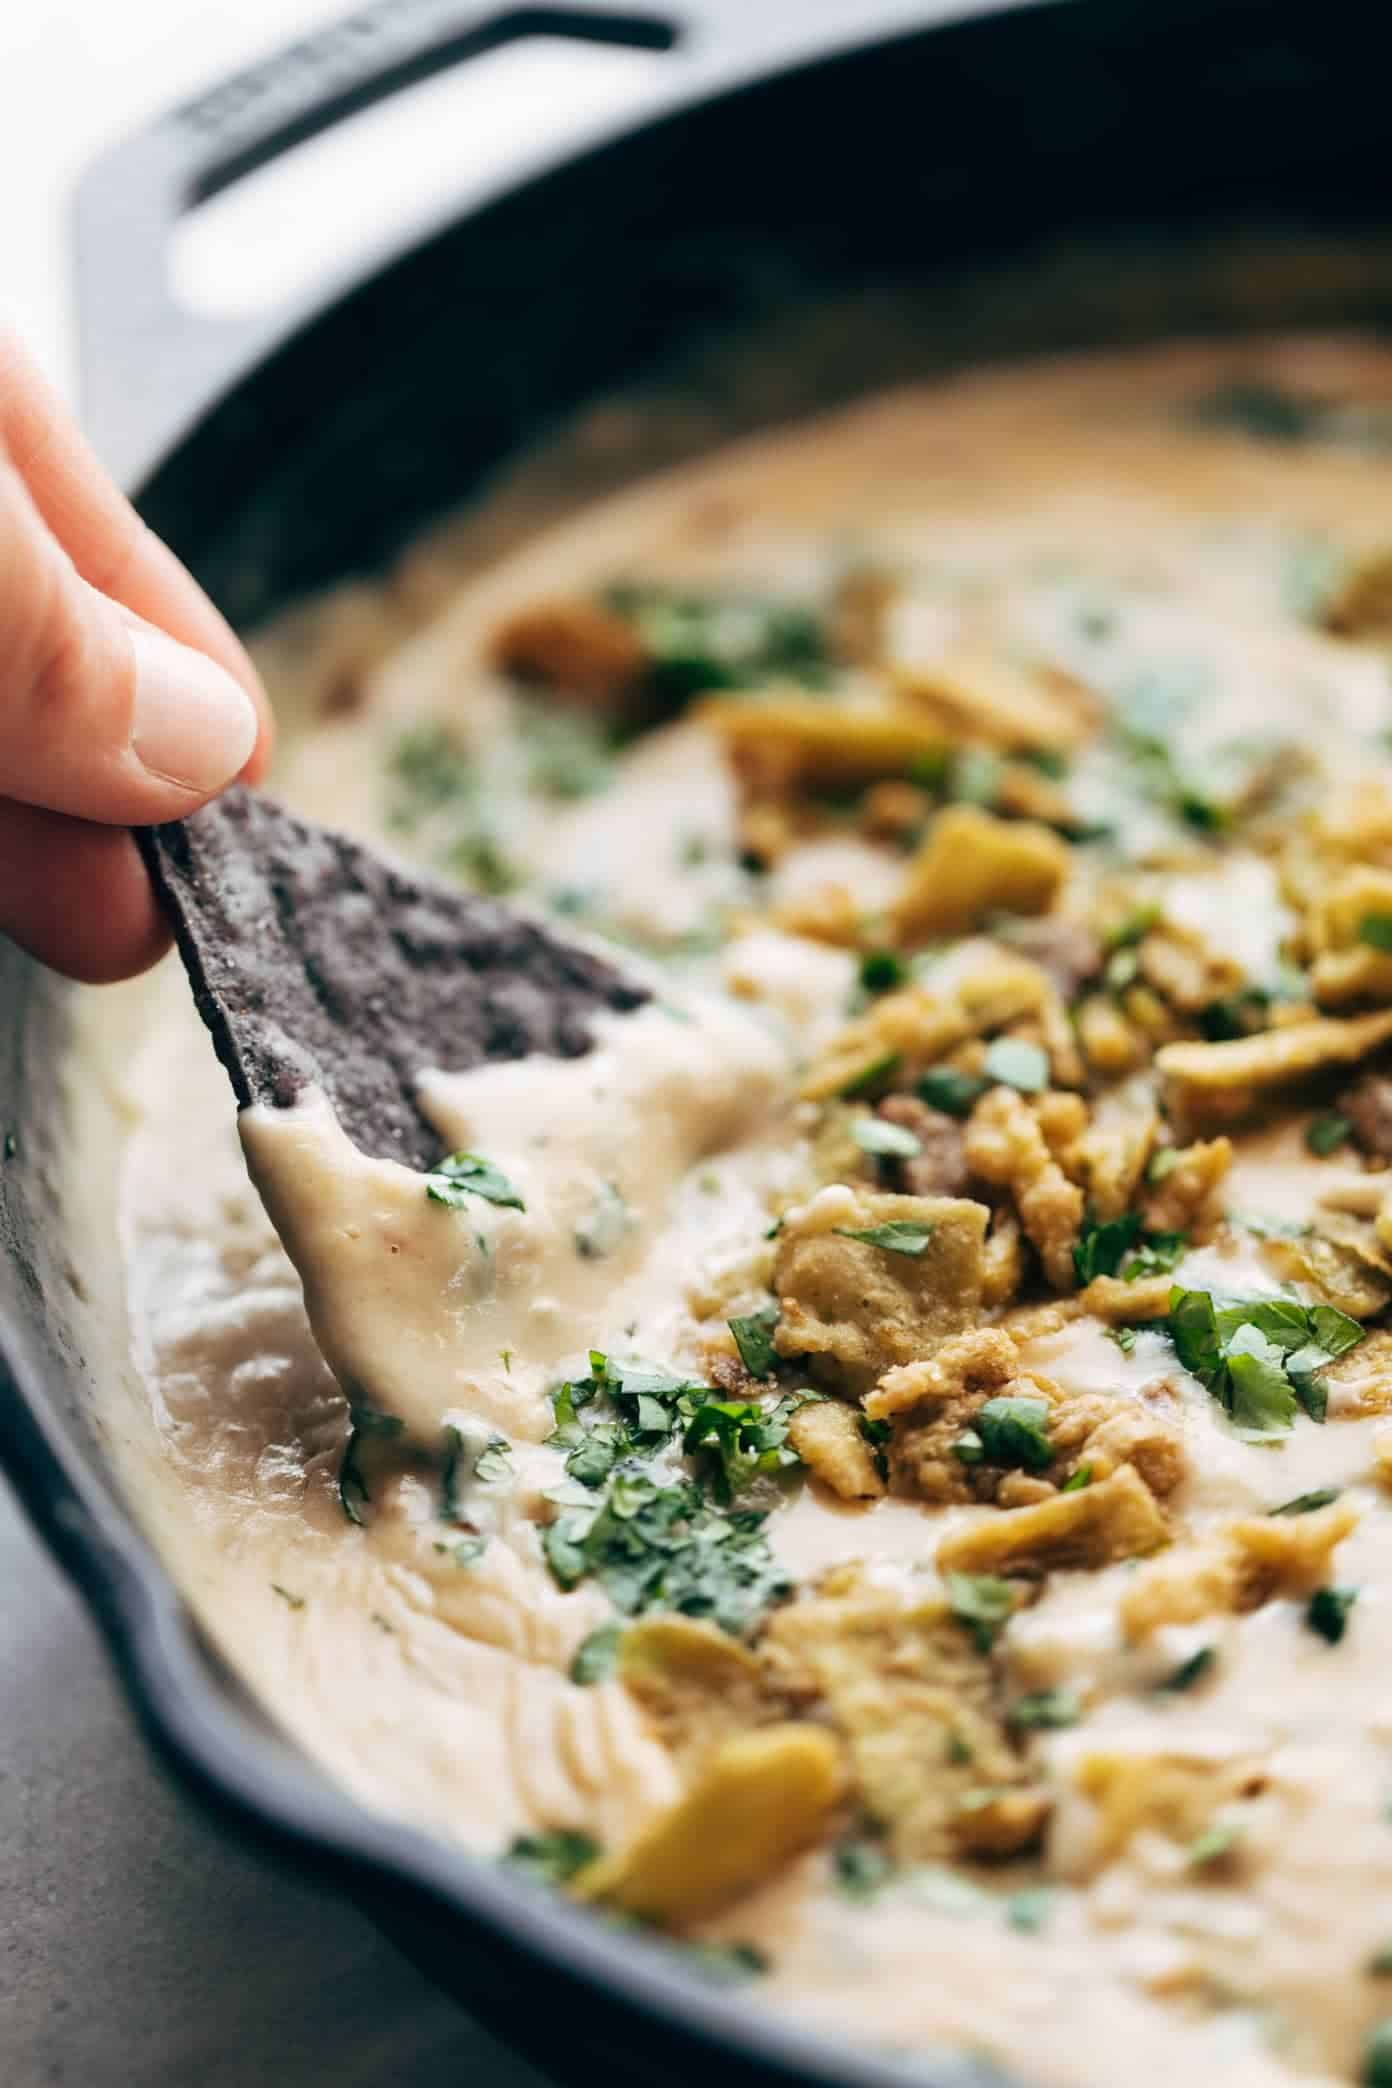 Tortilla chip dipping into Spinach Queso 